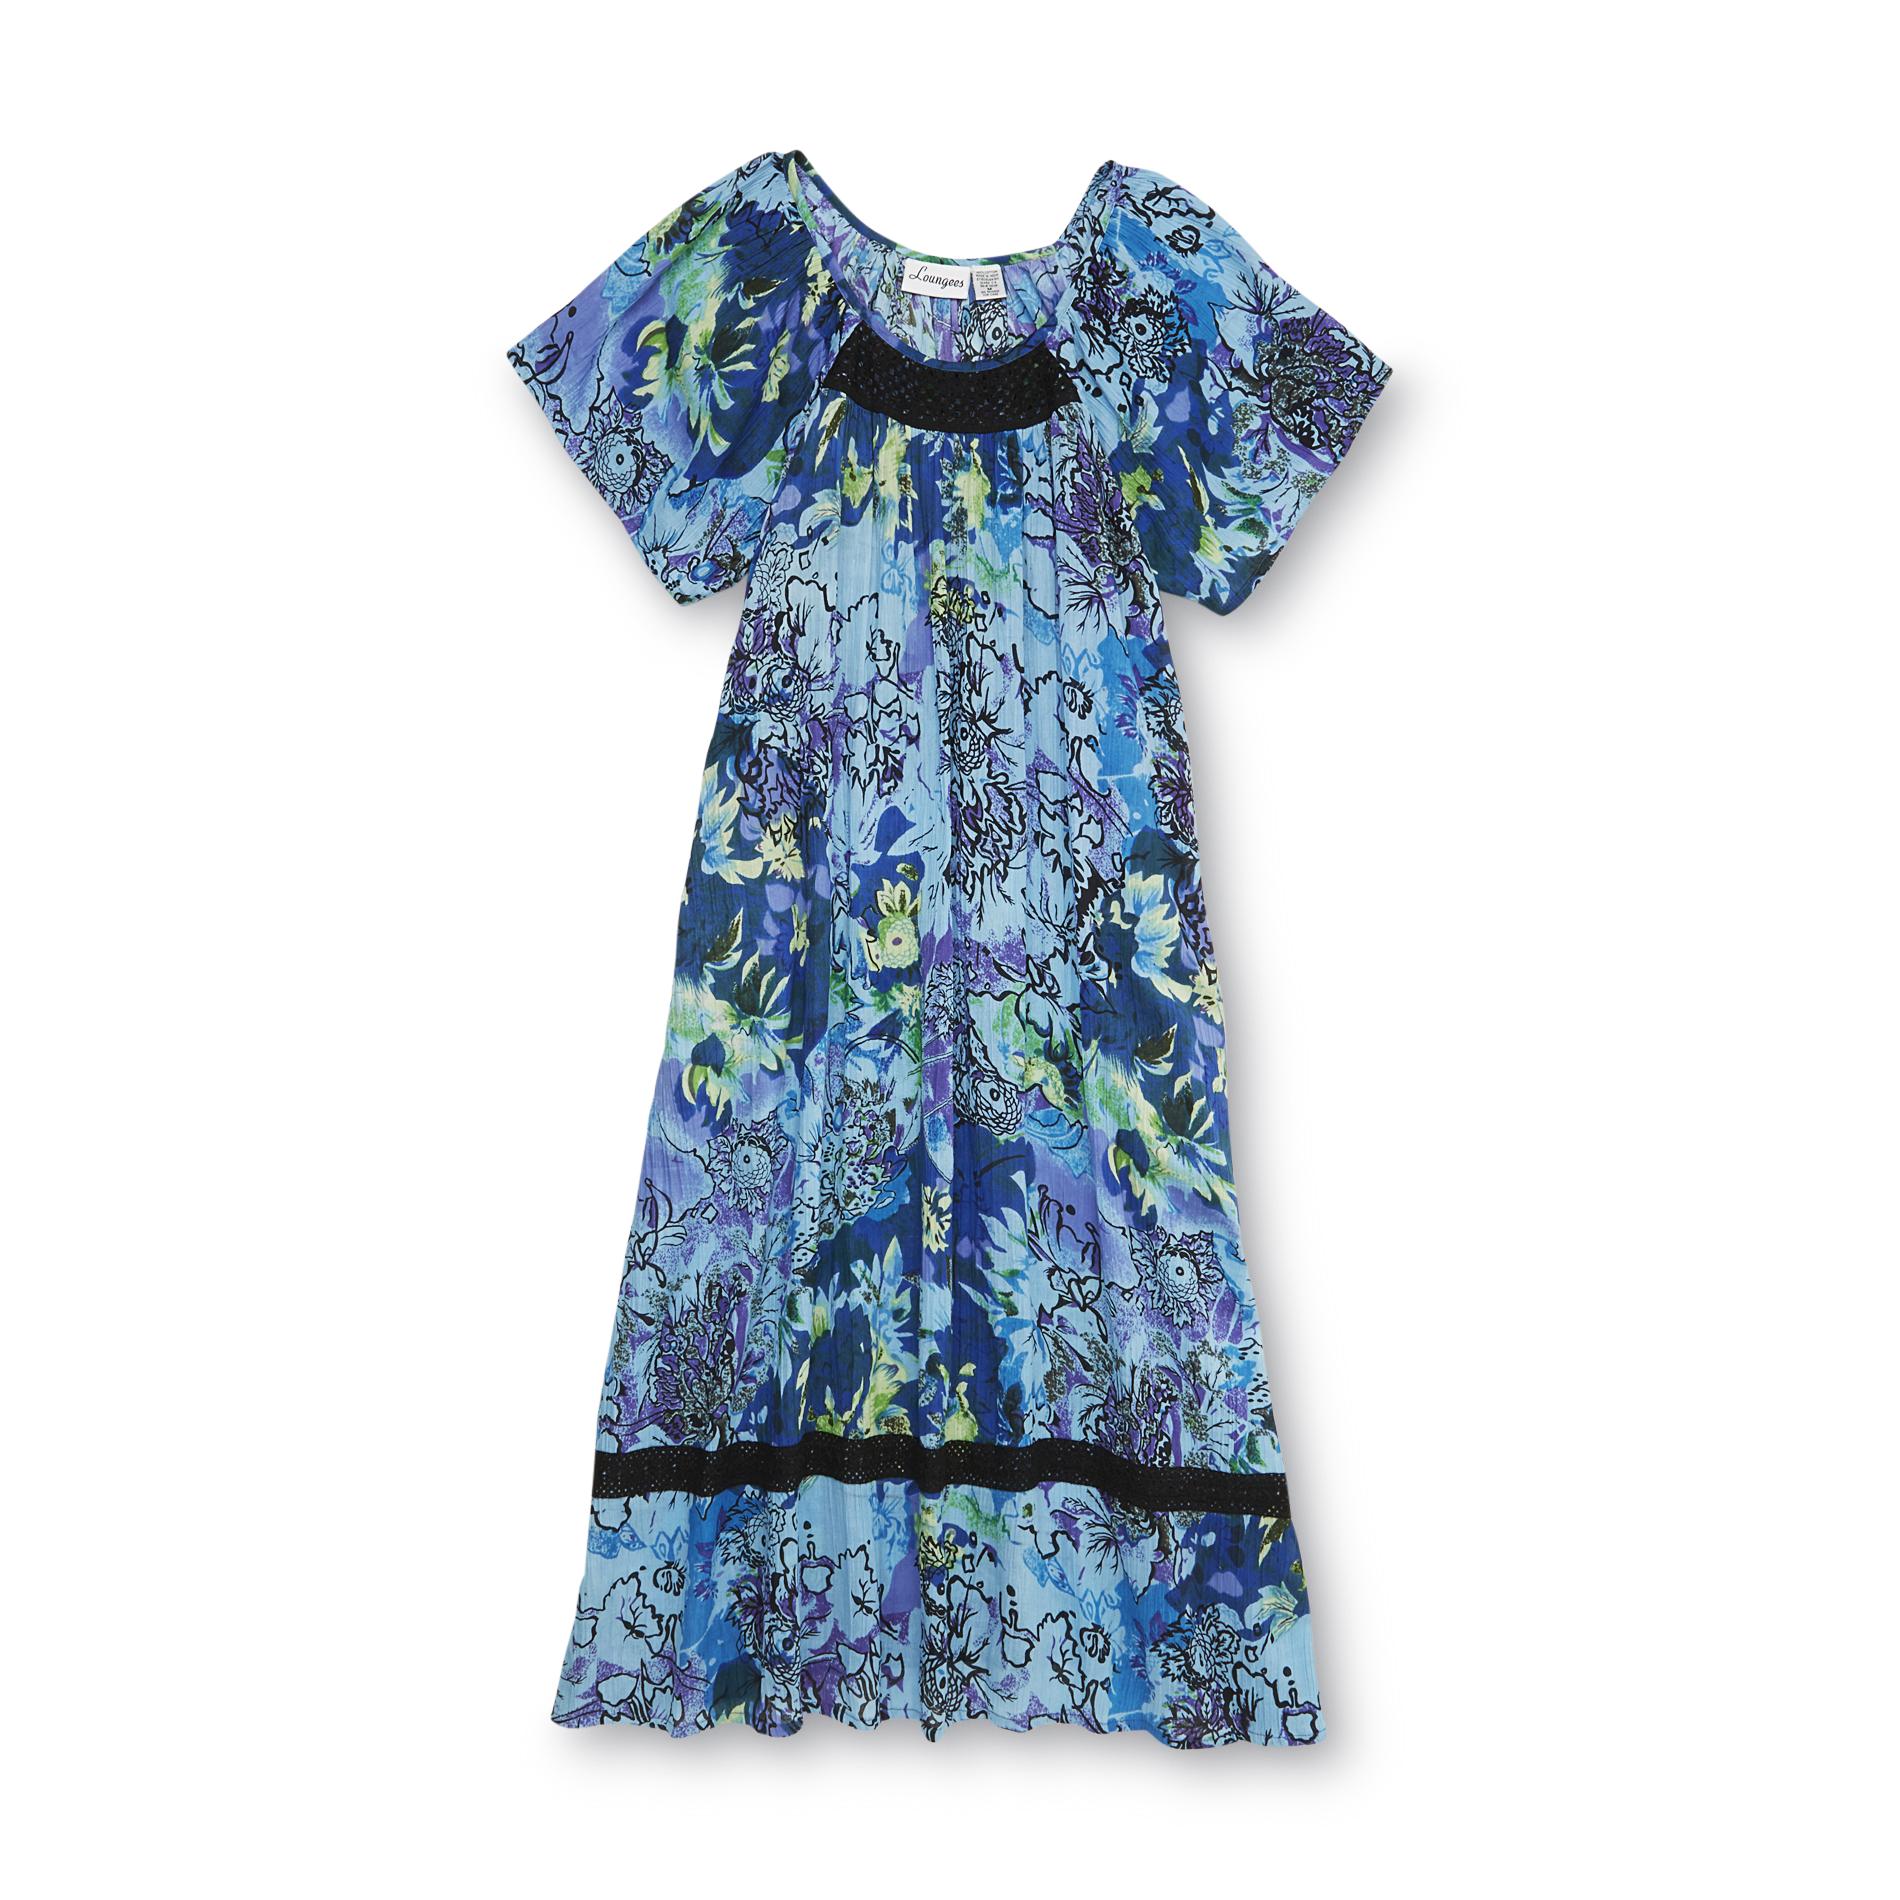 Loungees Women's Lounge Dress - Floral Watercolor